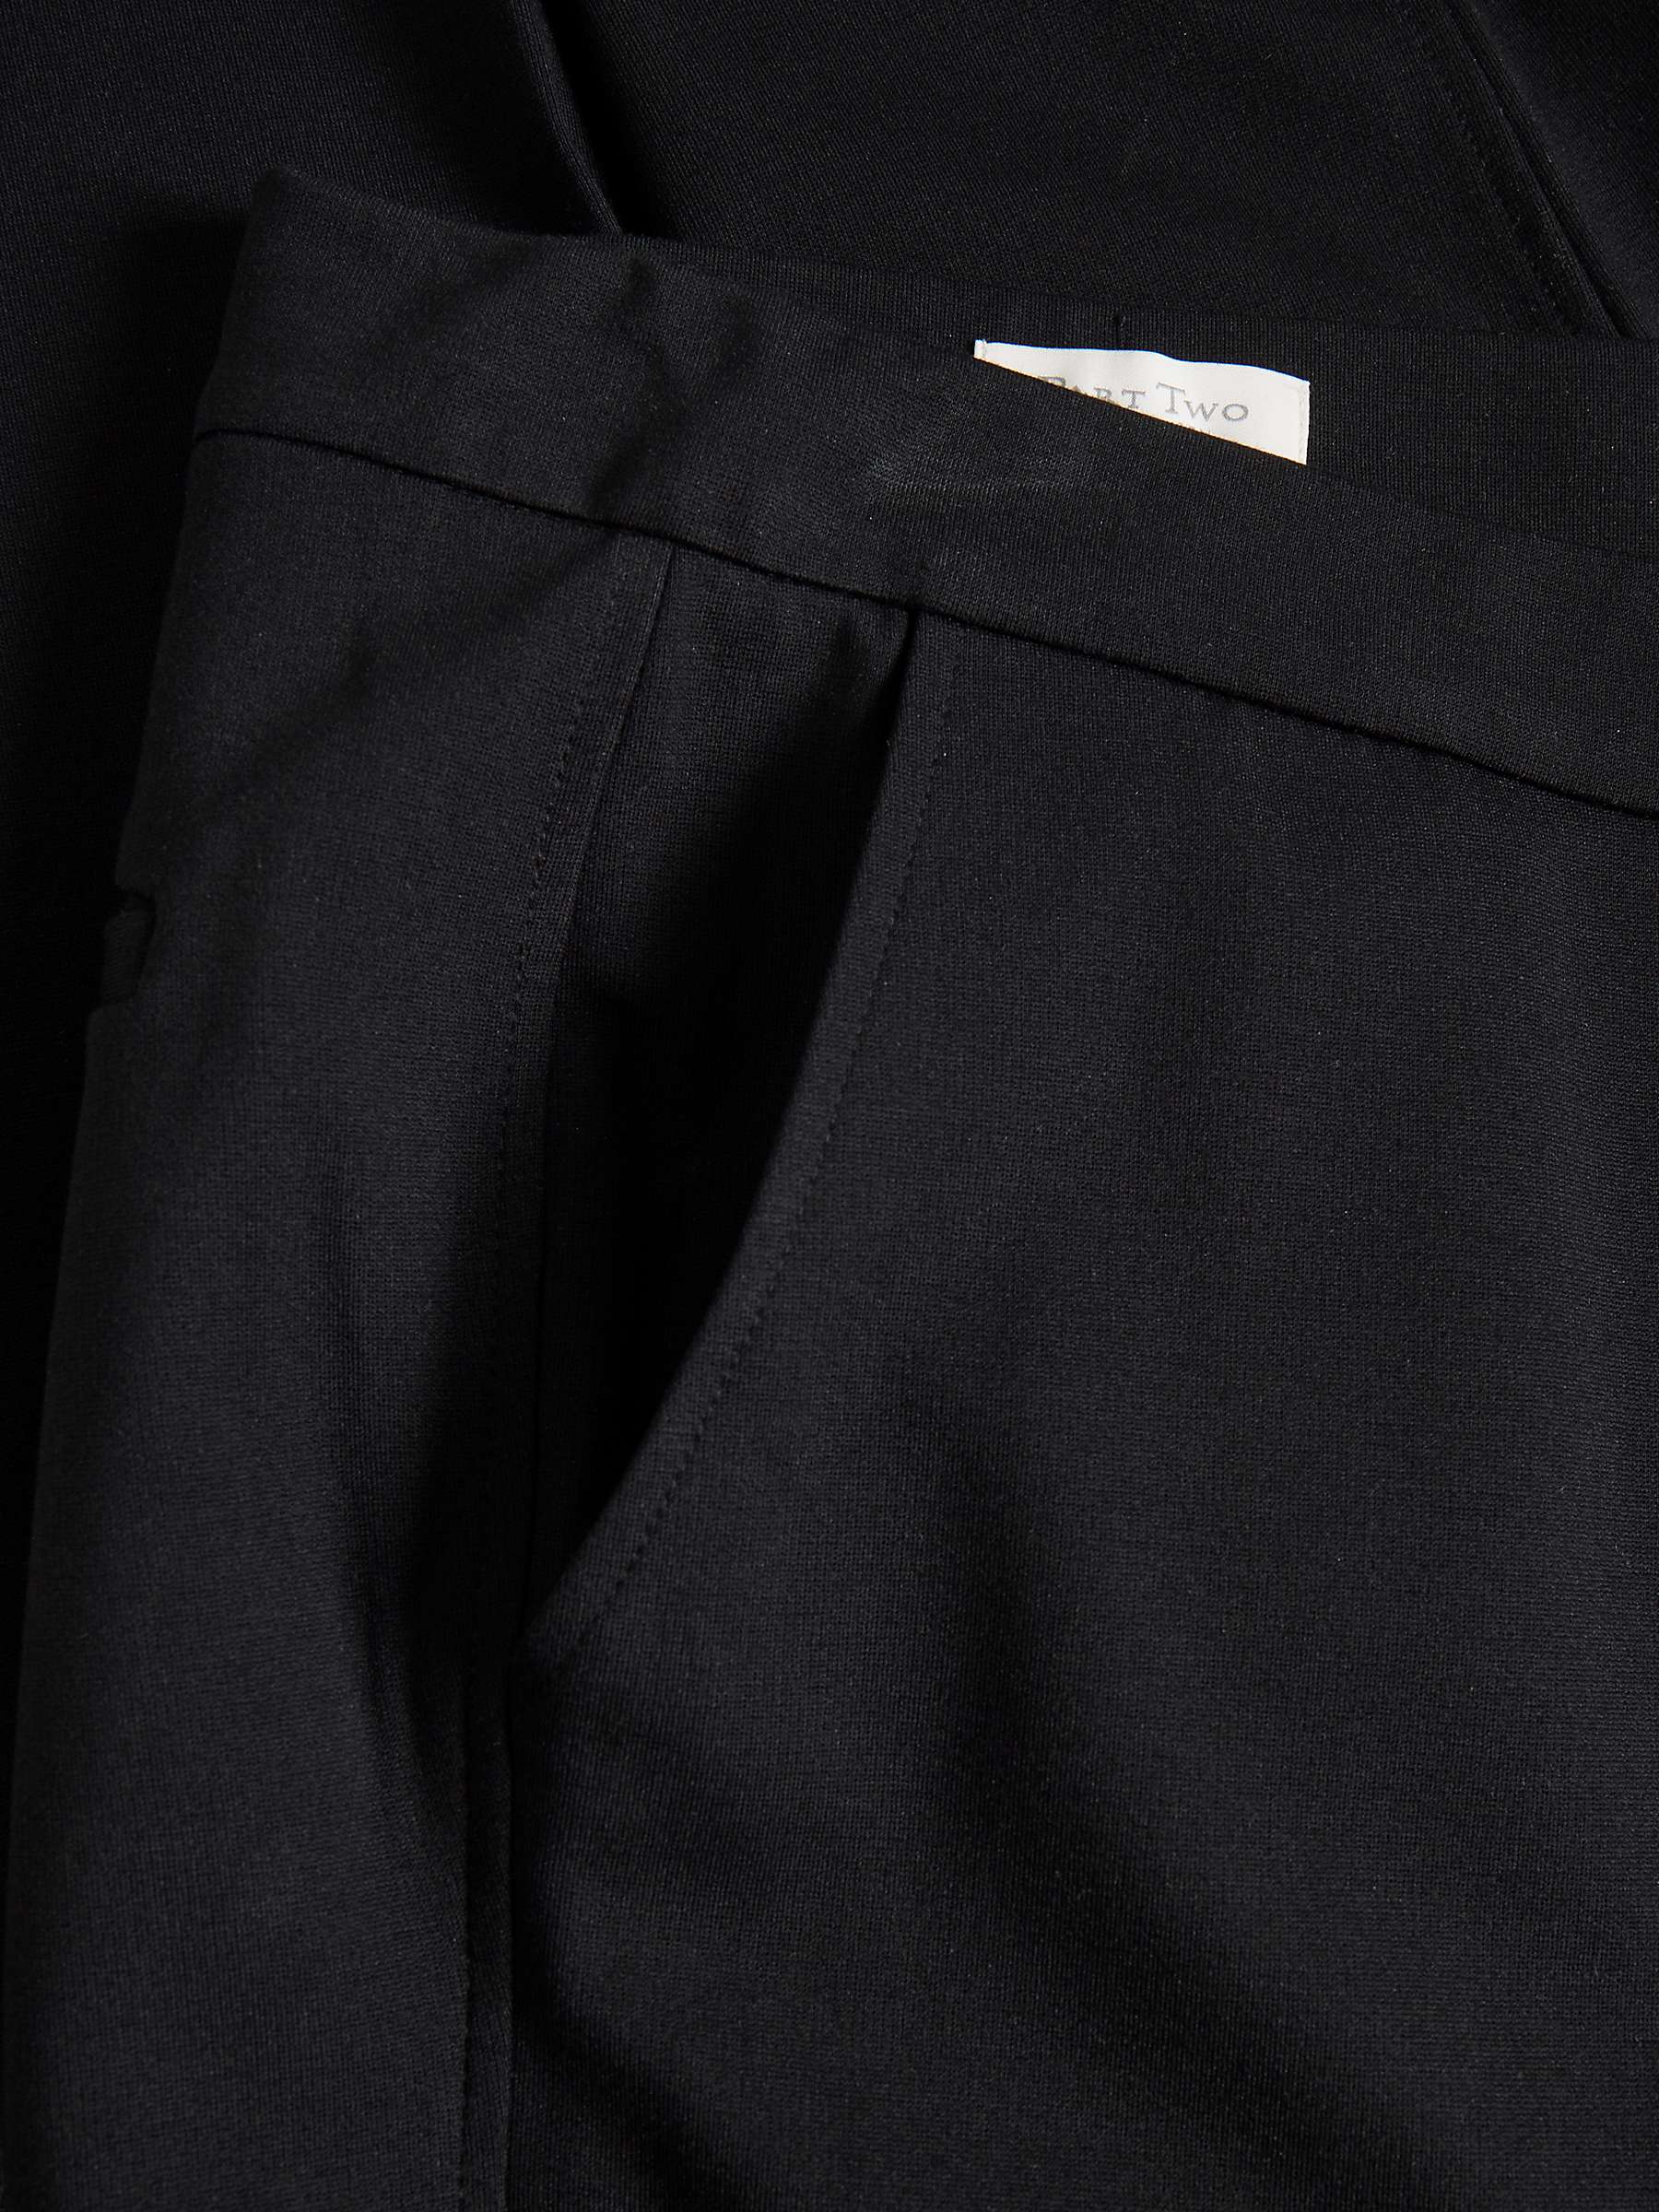 Part Two Mighty 110 Slim Leg Trousers, Black at John Lewis & Partners